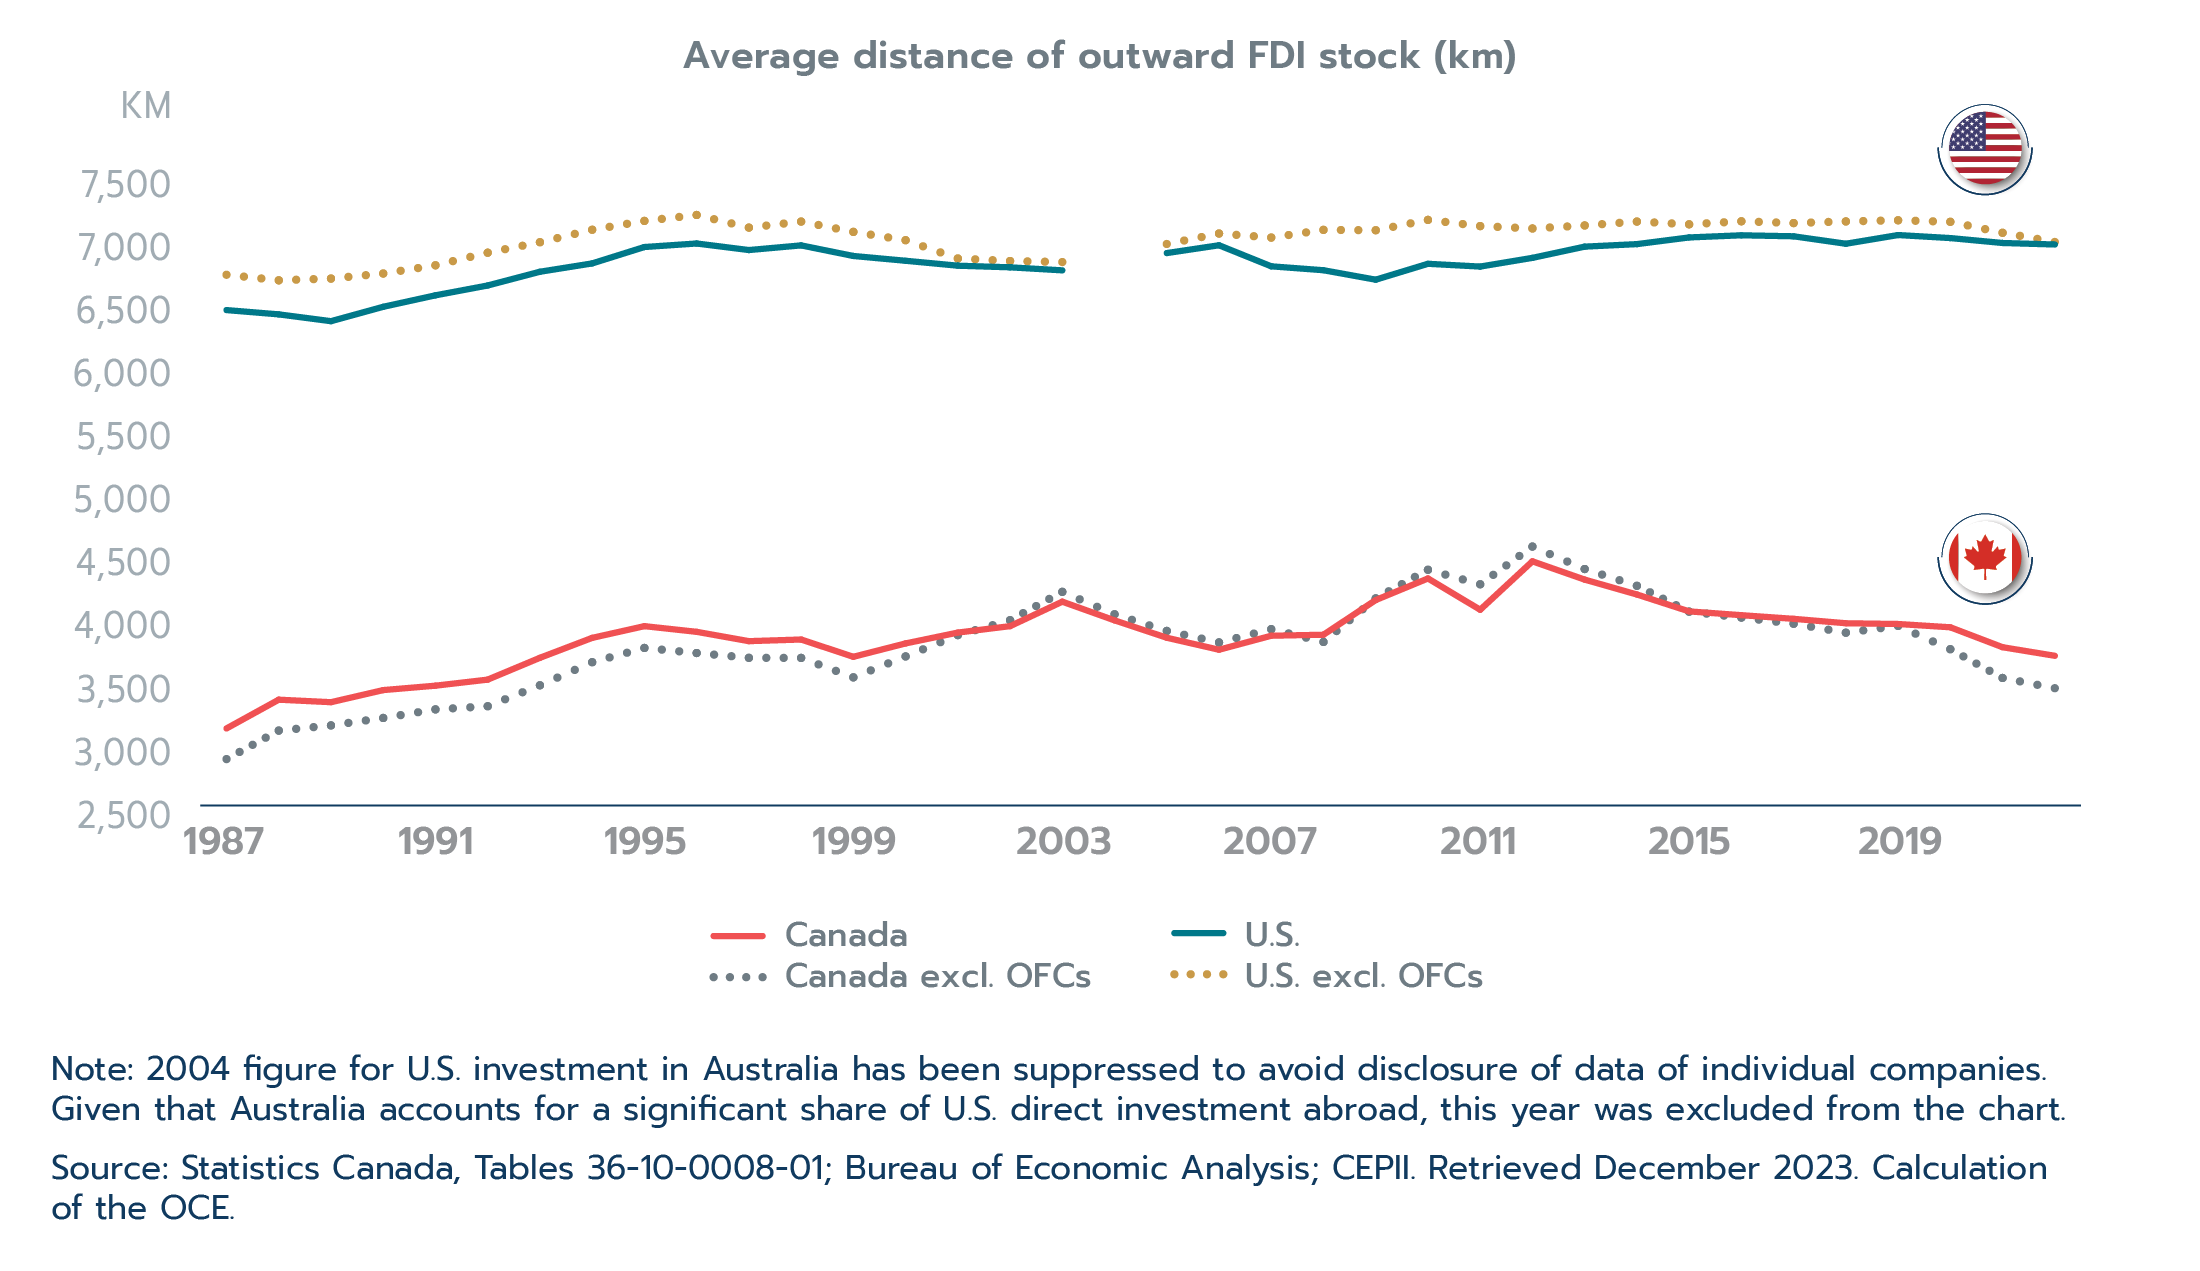 Figure 2.18: More of Canada’s outward direct investment is in closer countries, namely the U.S.